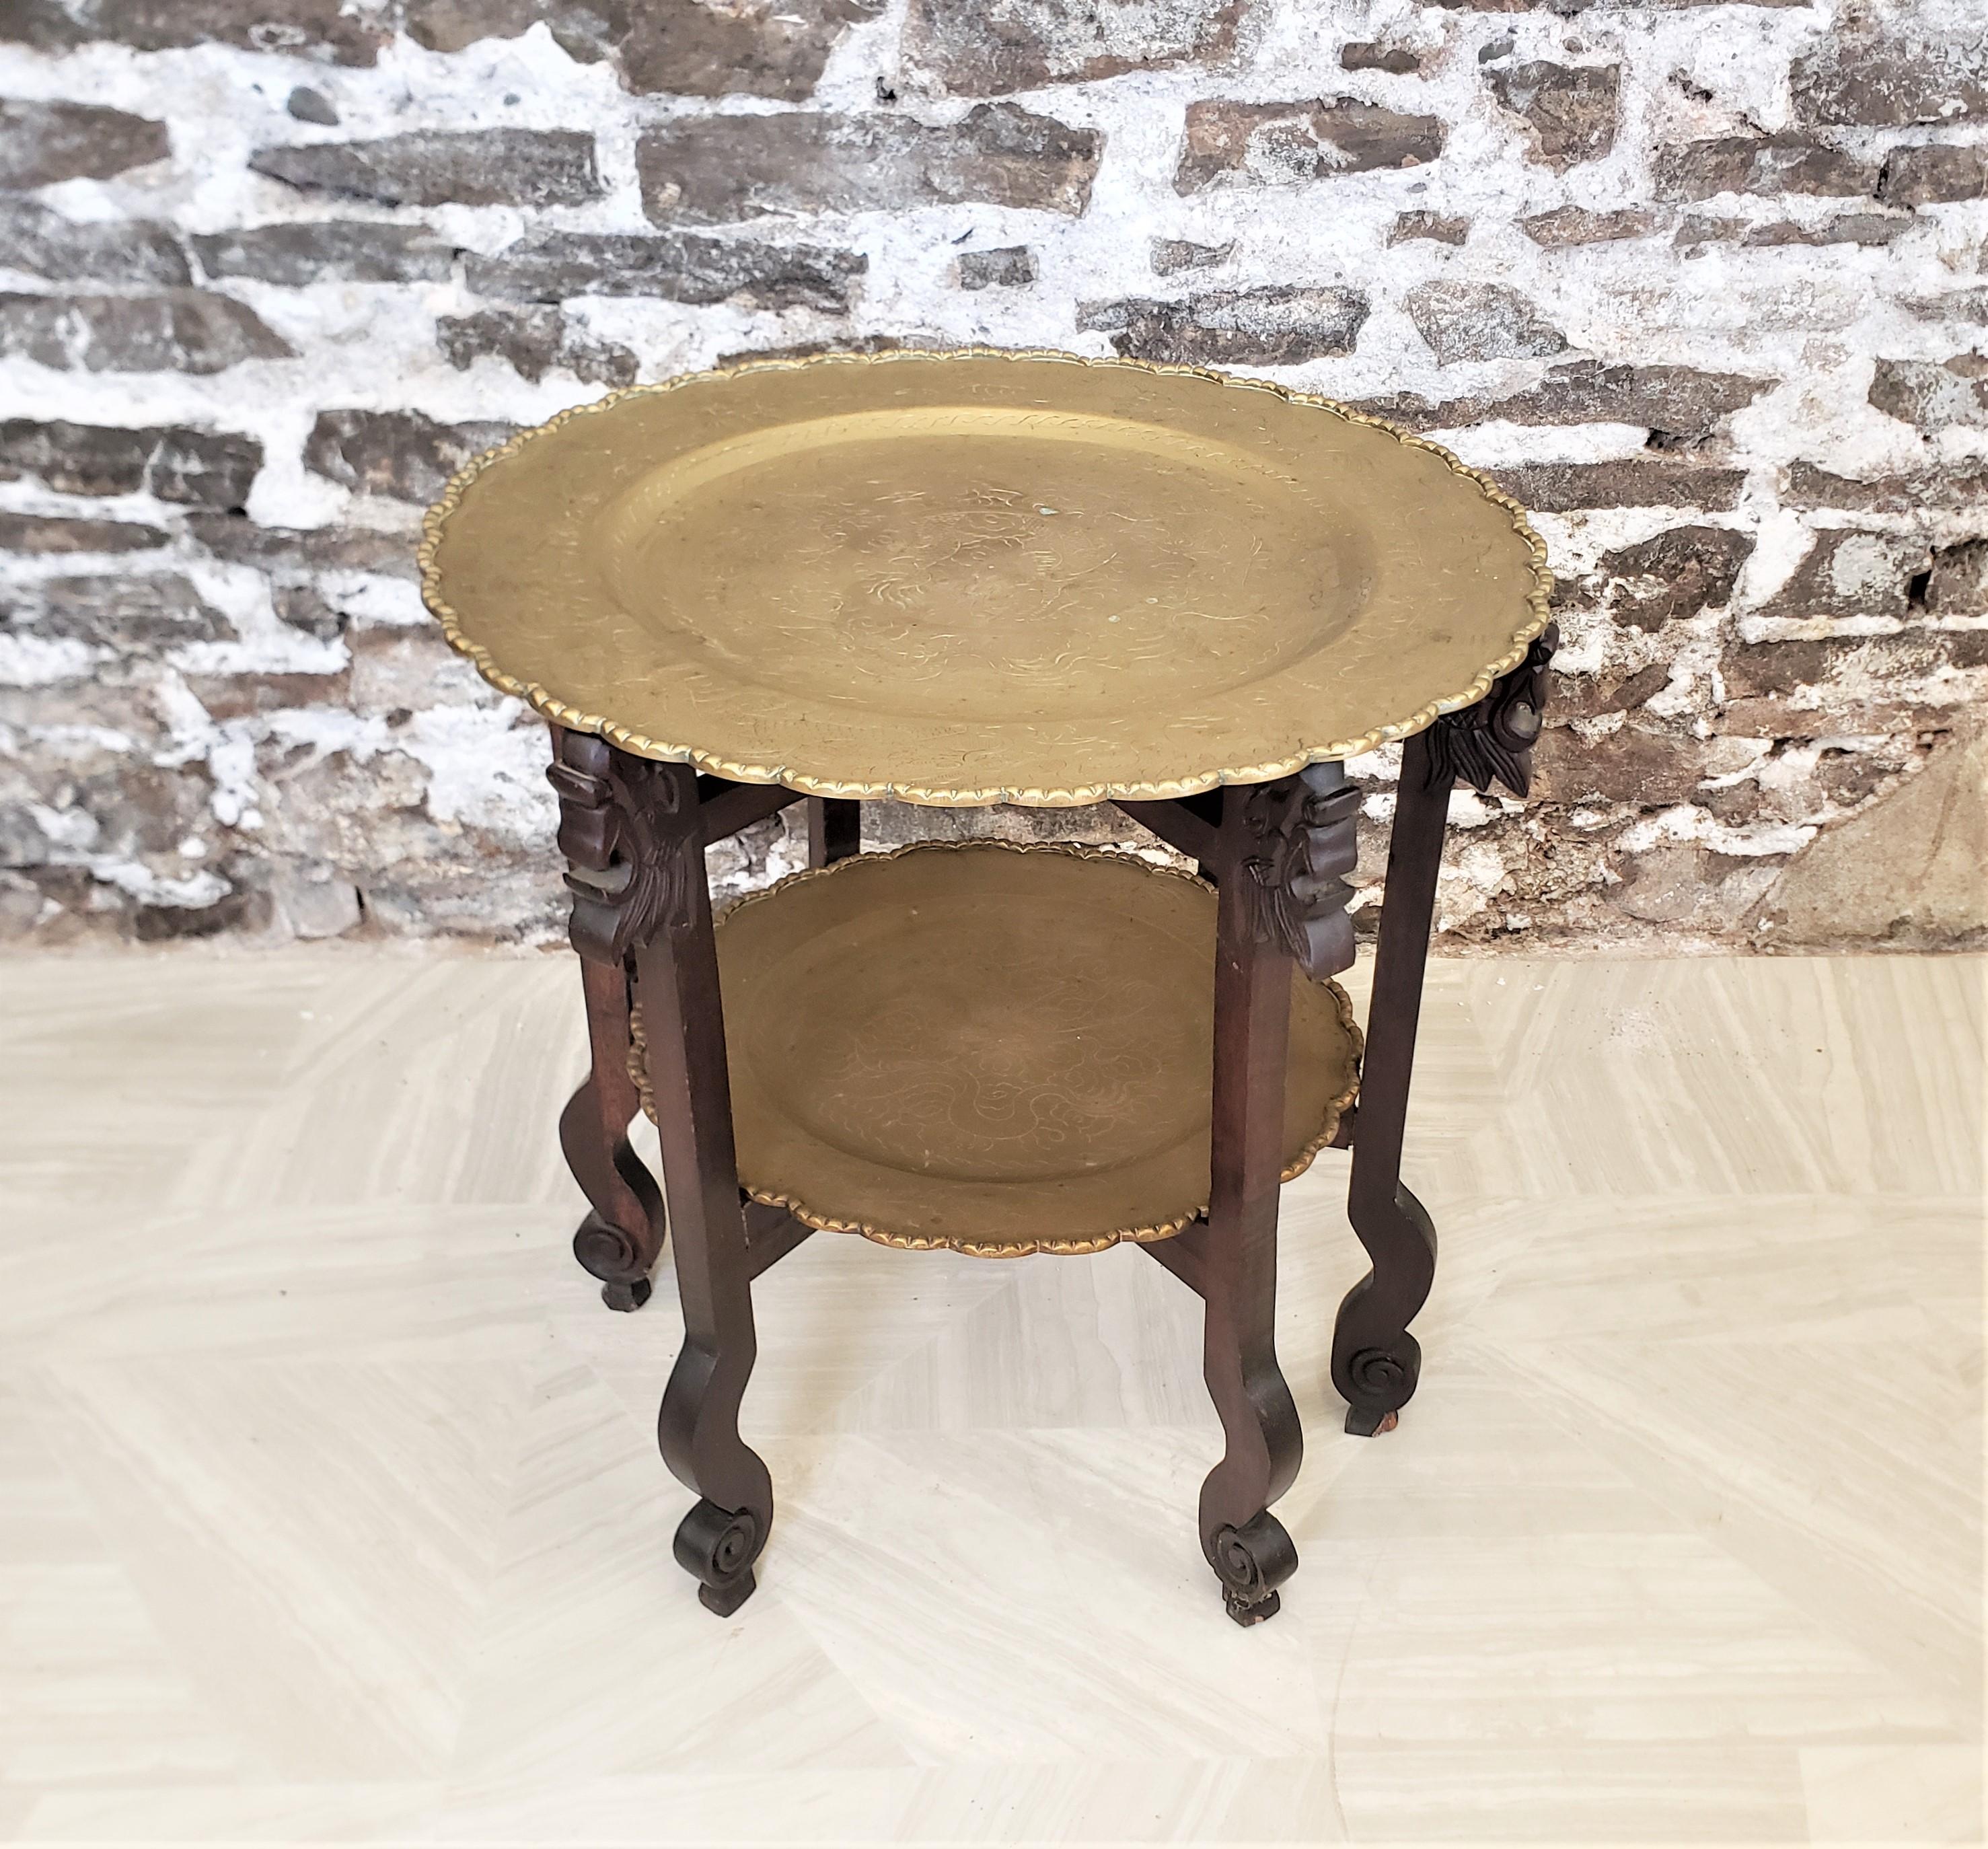 This antique tray table is unsigned, but presumed to have originate from China and date to approximately 1920 and done in a period Chinese Export style. The table set is composed of two brass trays with pie crust edges and engraved tops with a hand